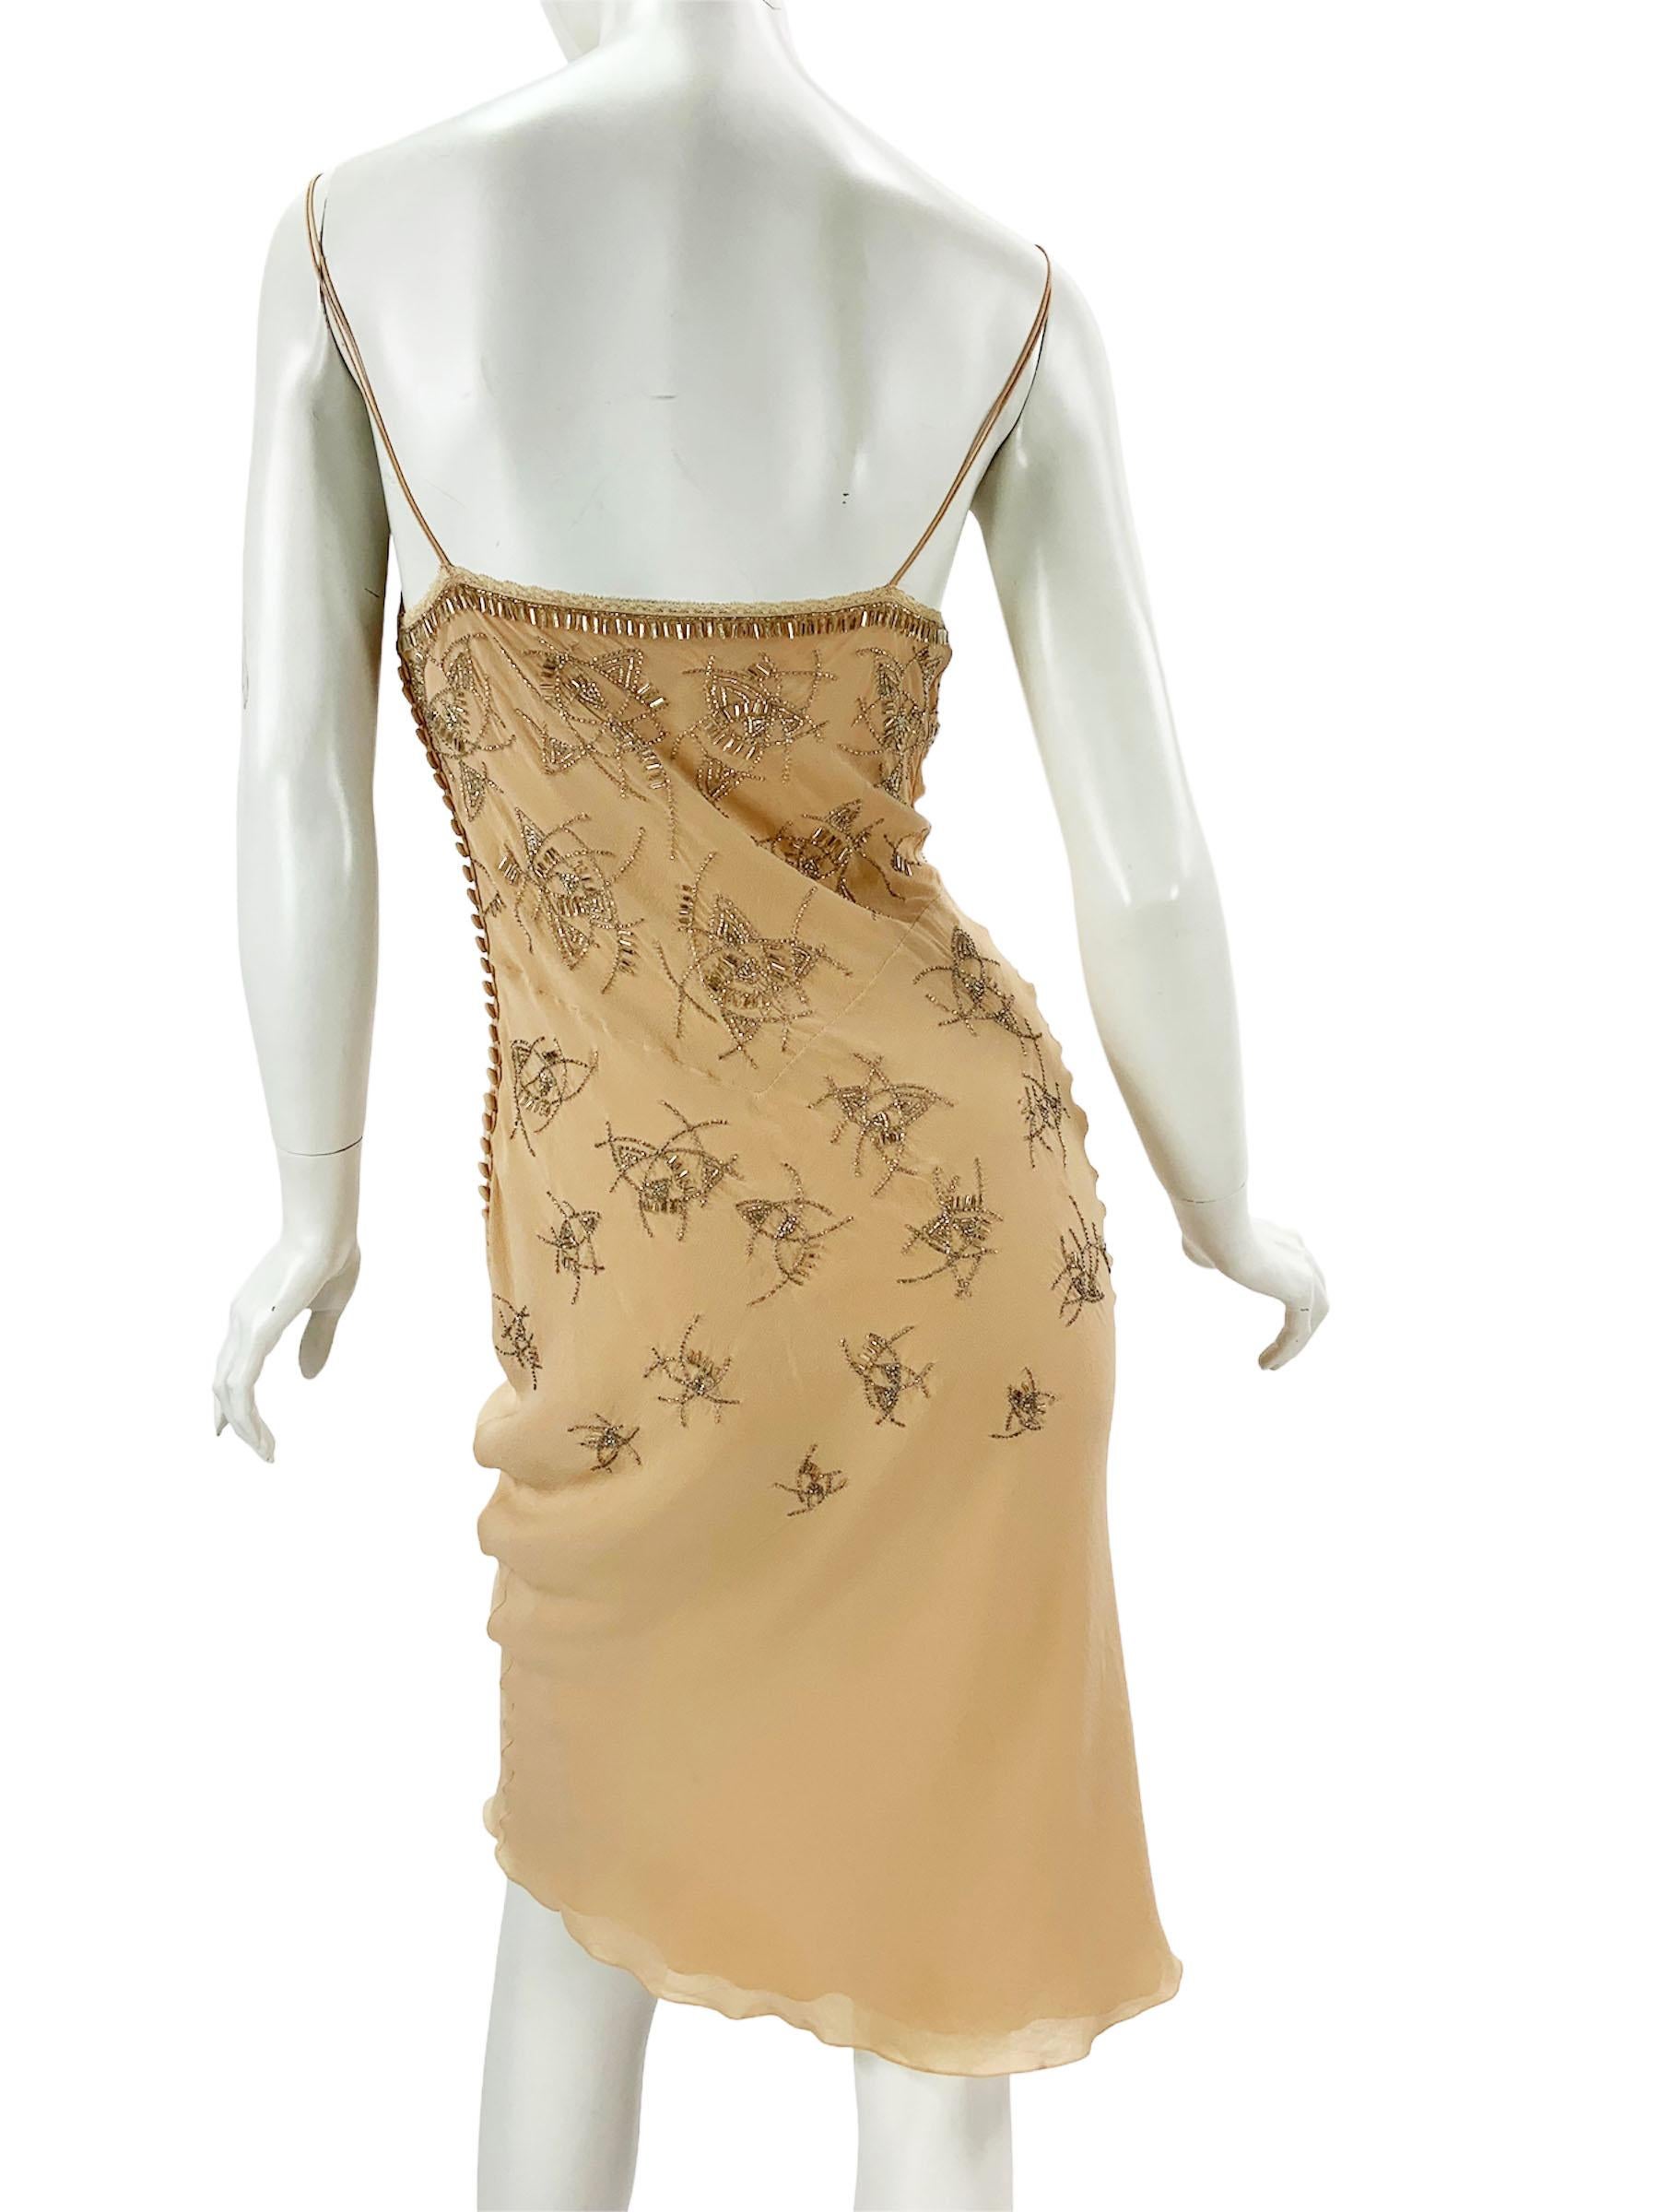 Christian Dior by John Galliano 2005 Silk Nude Embellished Dress Fr. 42 In Excellent Condition For Sale In Montgomery, TX